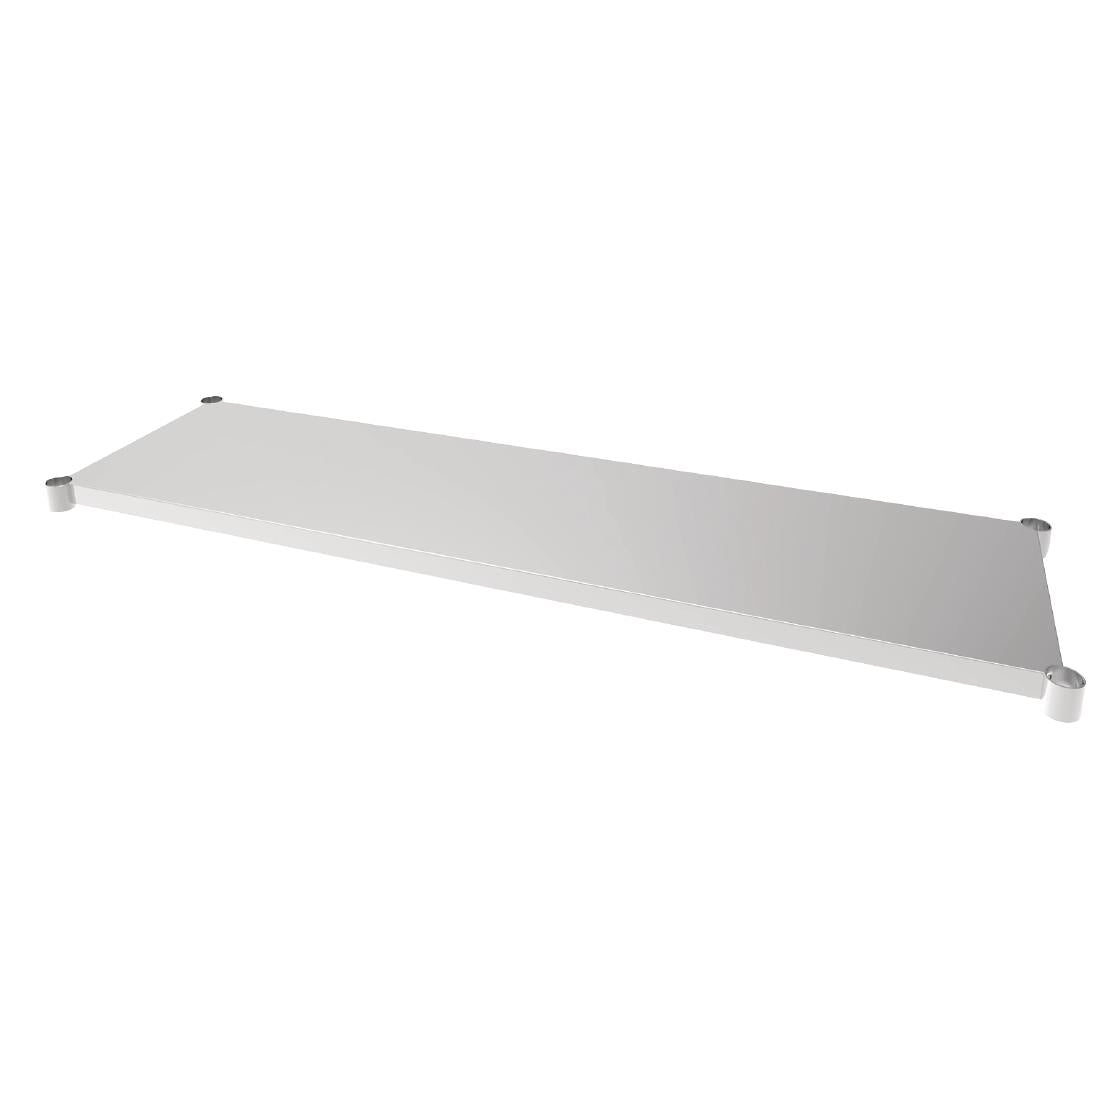 CP834 Vogue Steel Table Shelf 1800x600mm JD Catering Equipment Solutions Ltd